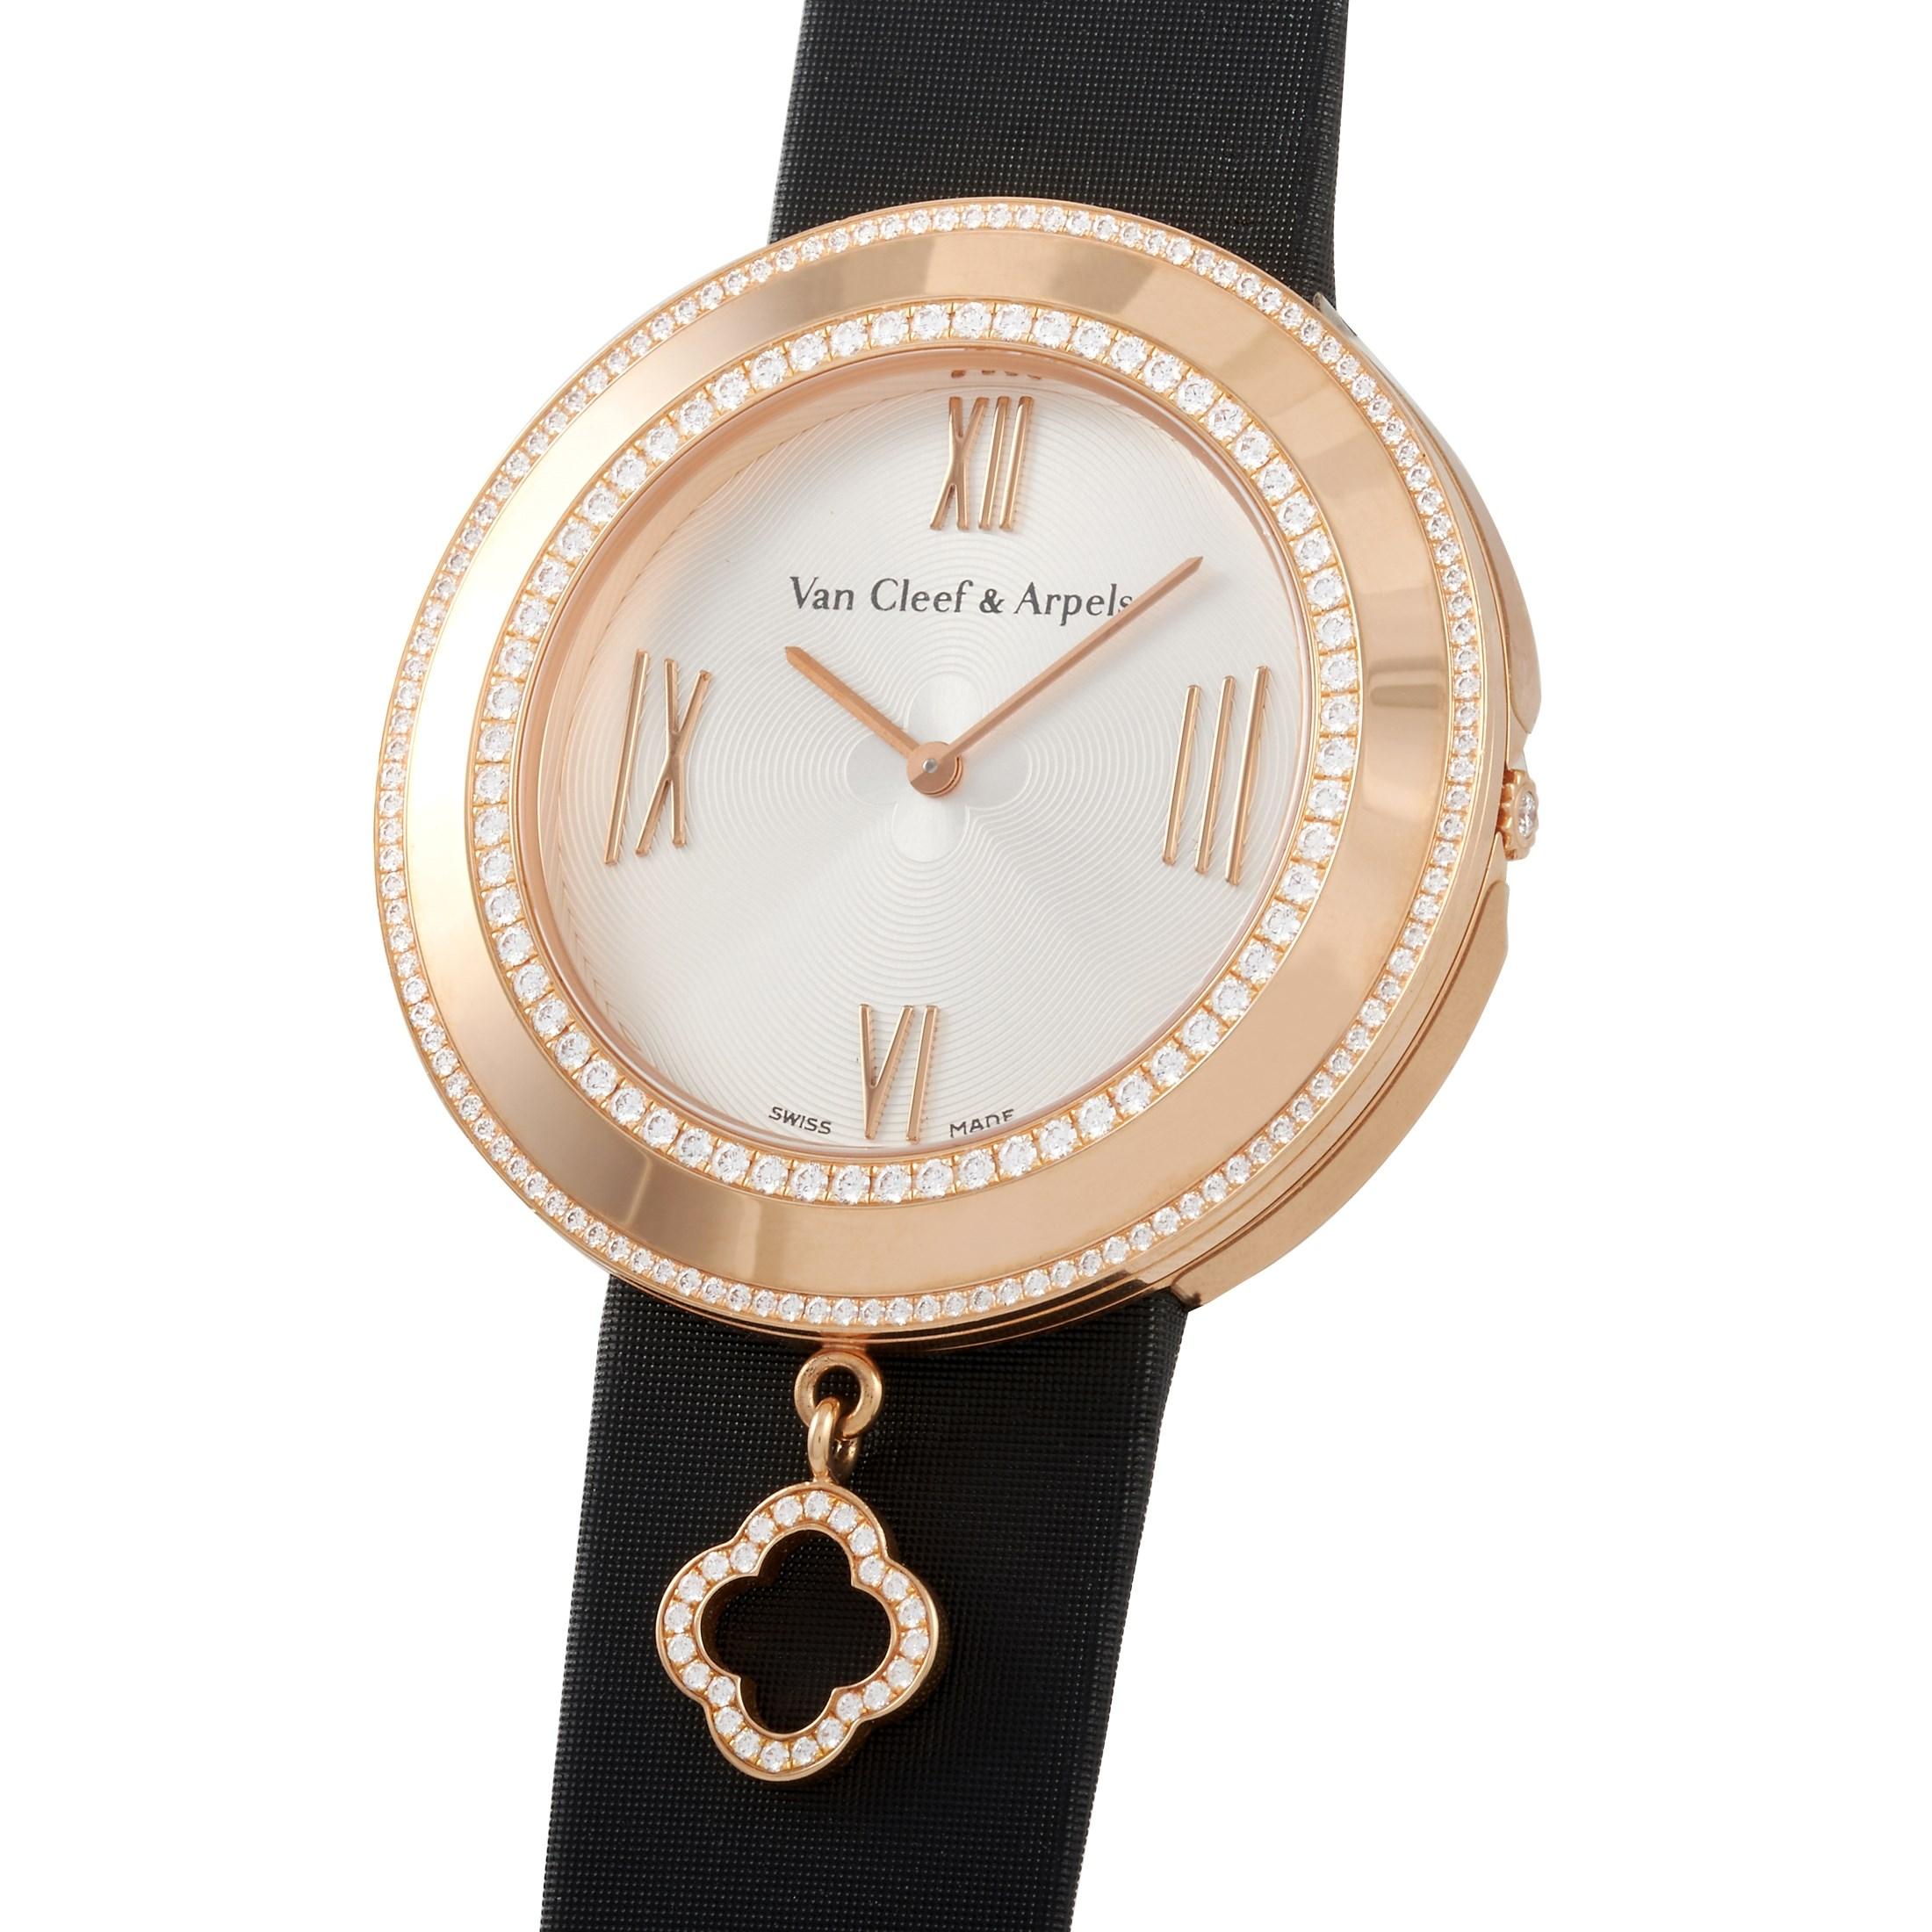 This Van Cleef & Arpels 18K Rose Gold Alhambra Charms Watch, reference number 2572198, features an 18K Rose Gold case measuring 38 mm in diameter. The bezel is set with two rows of round diamonds, and features an Alhambra charm. It is presented on a